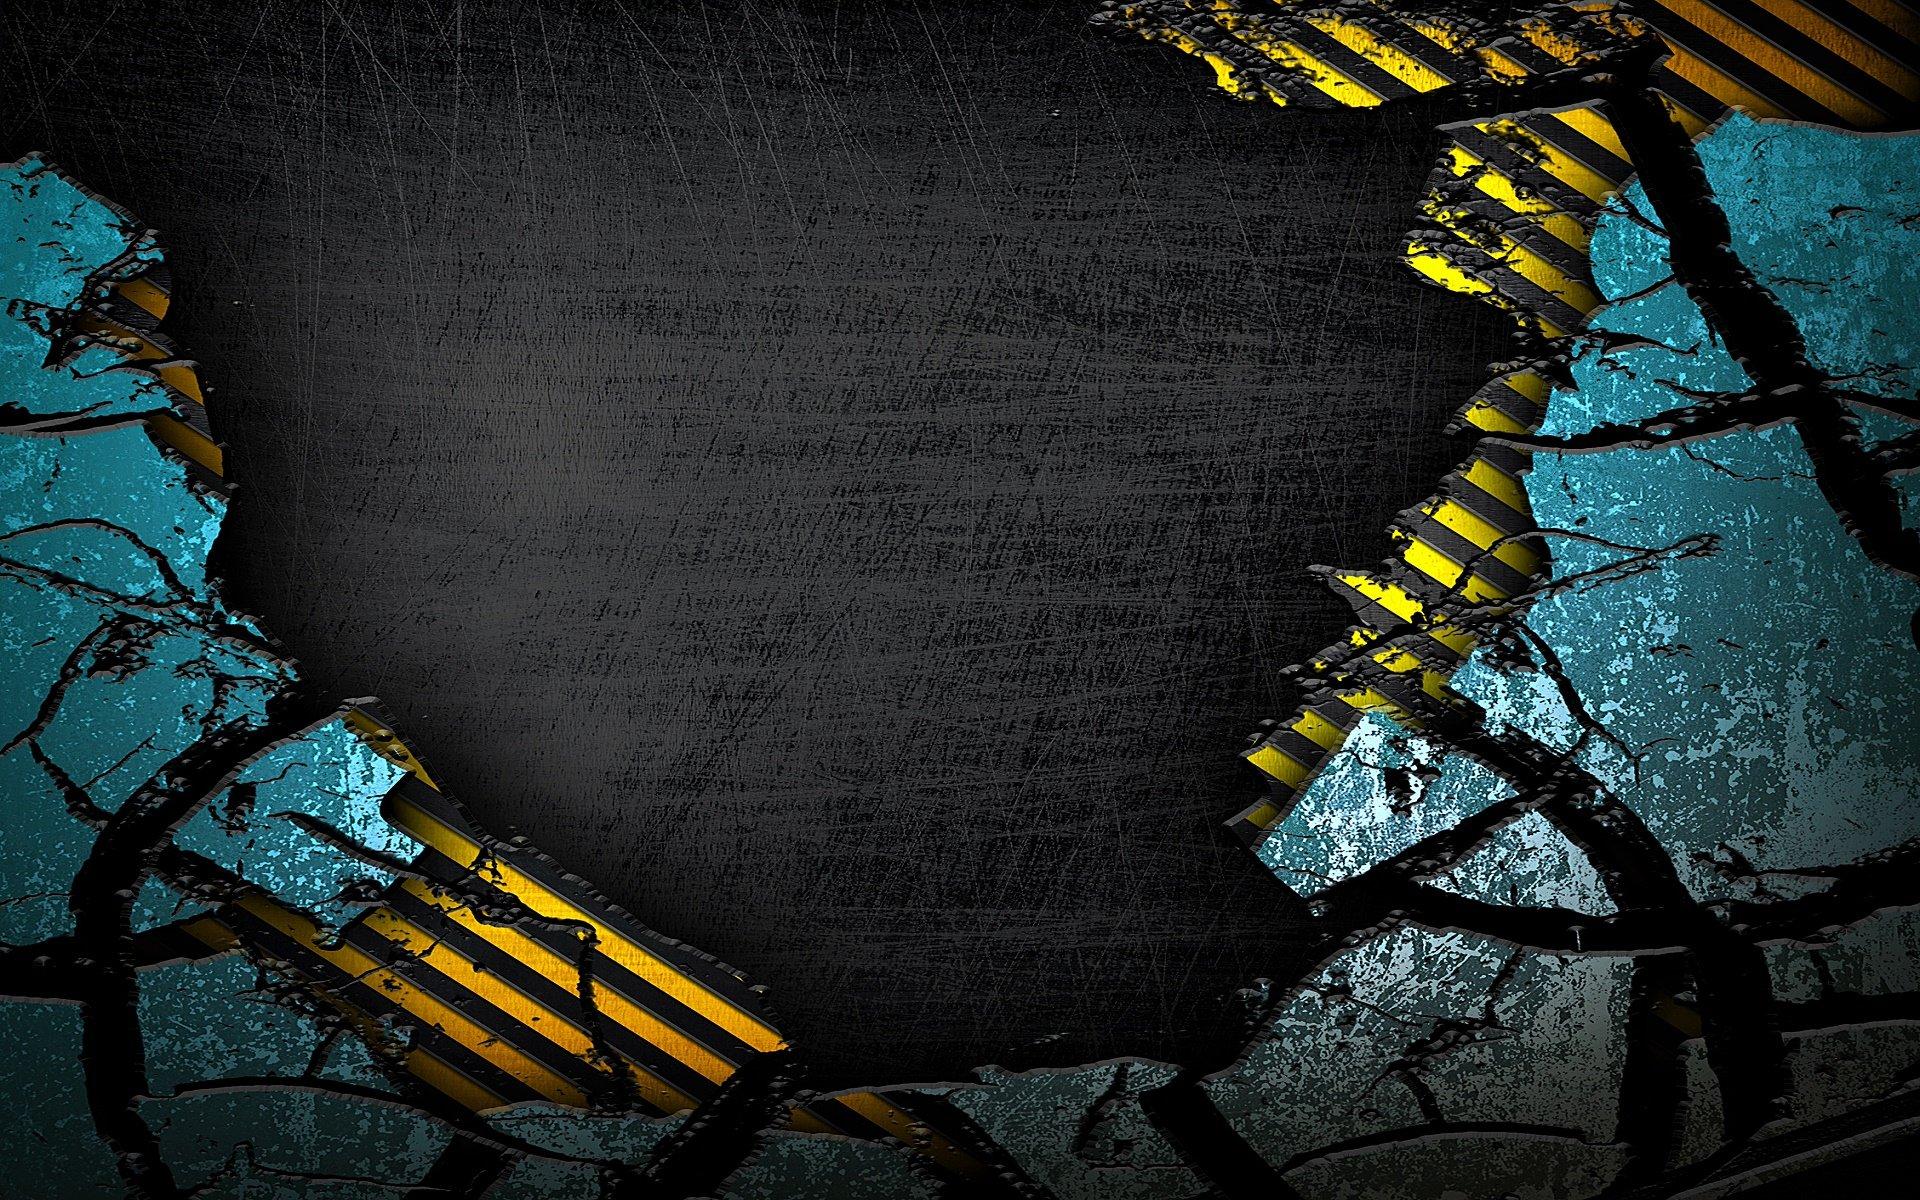 Black and yellow caution tape on a black and blue background - Grunge